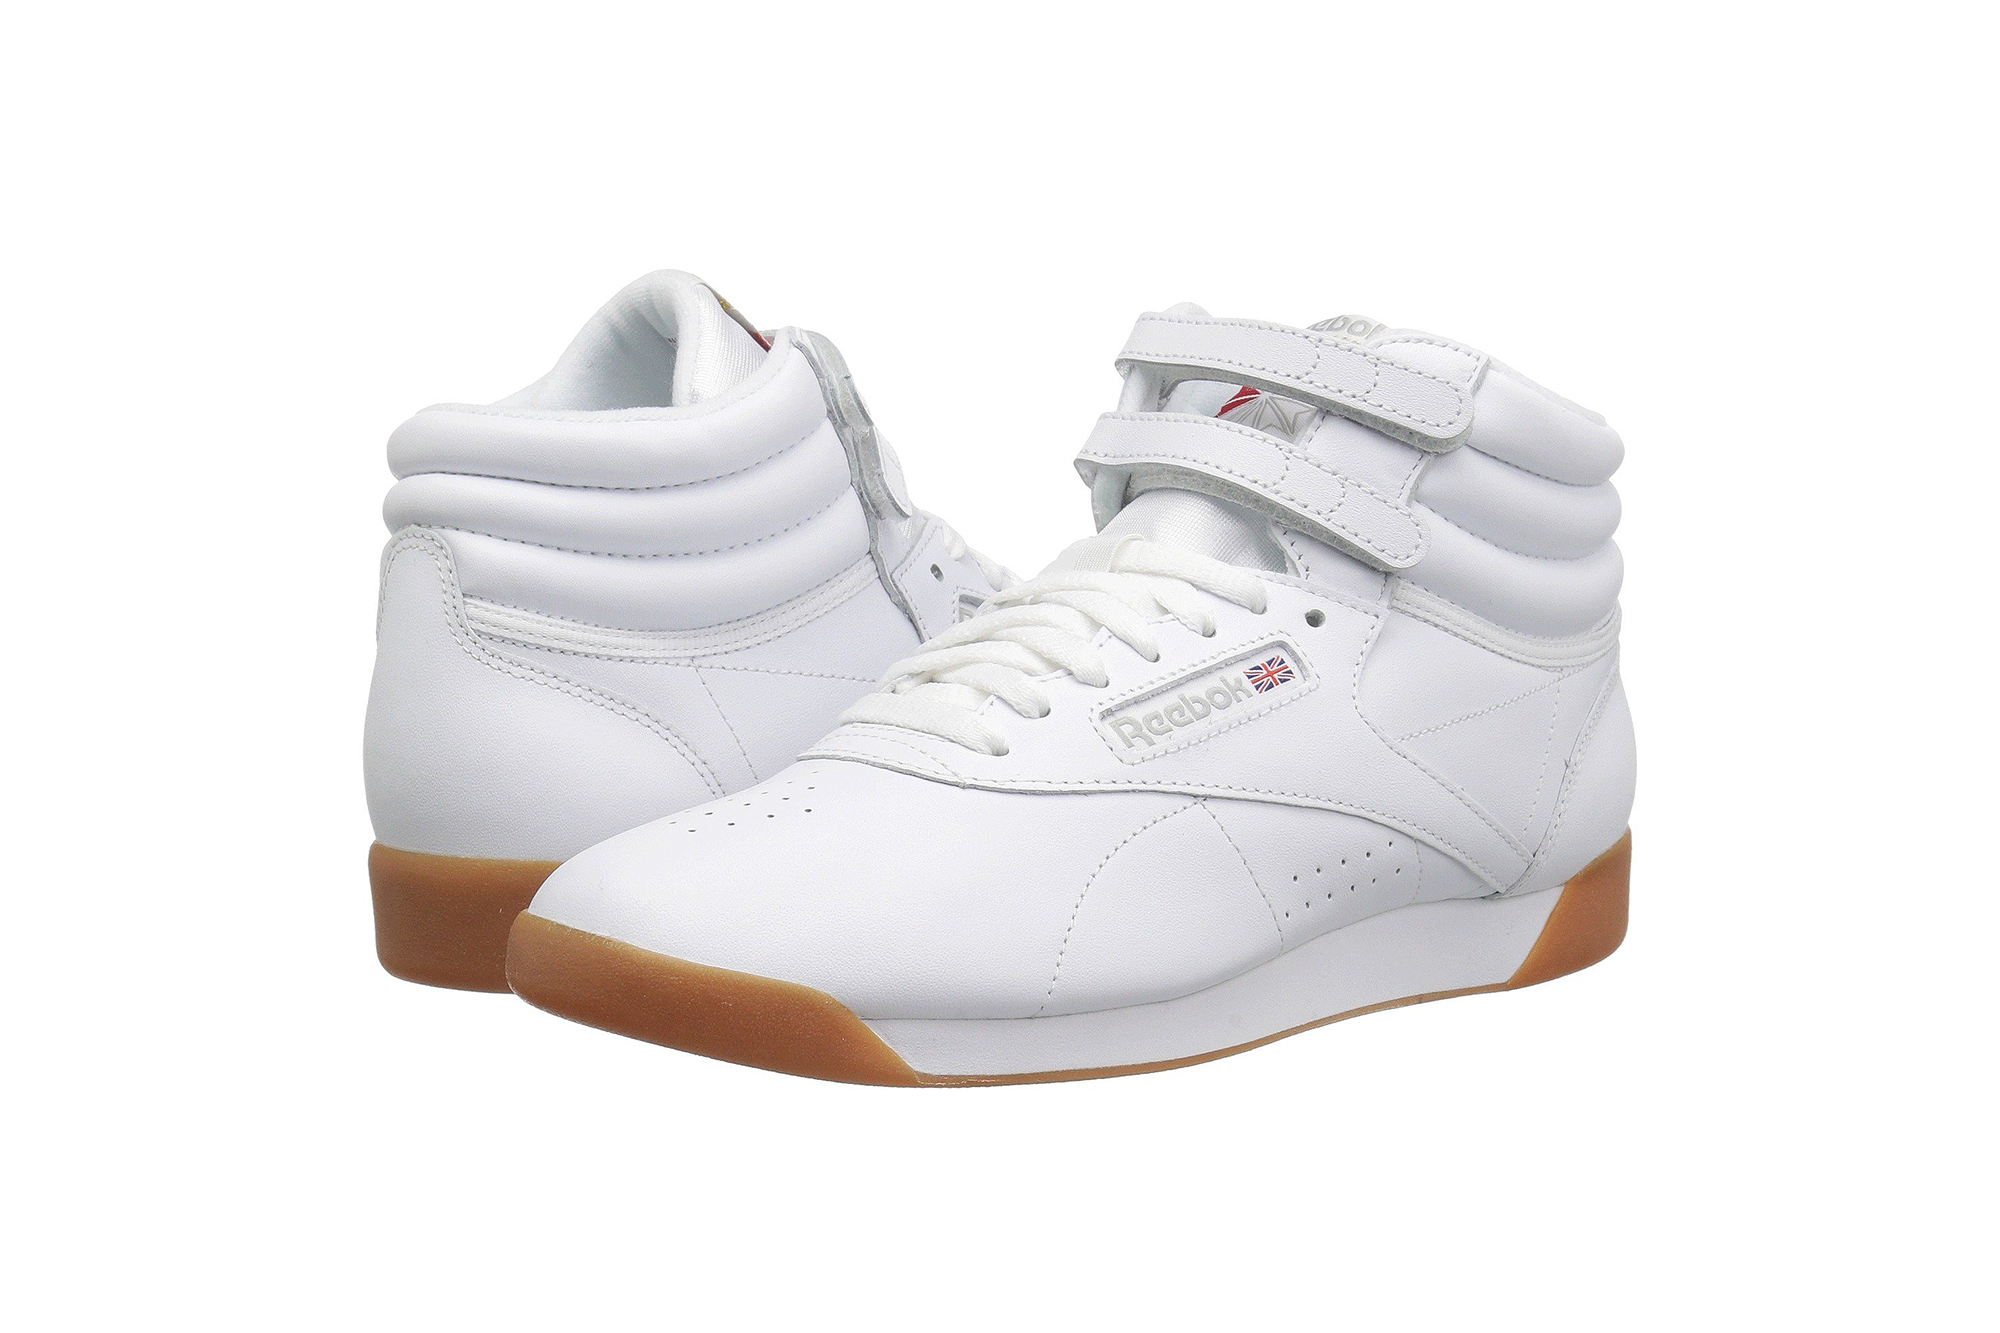 Go Retro With These Reebok Freestyle Hi Sneakers — Now on Sale!